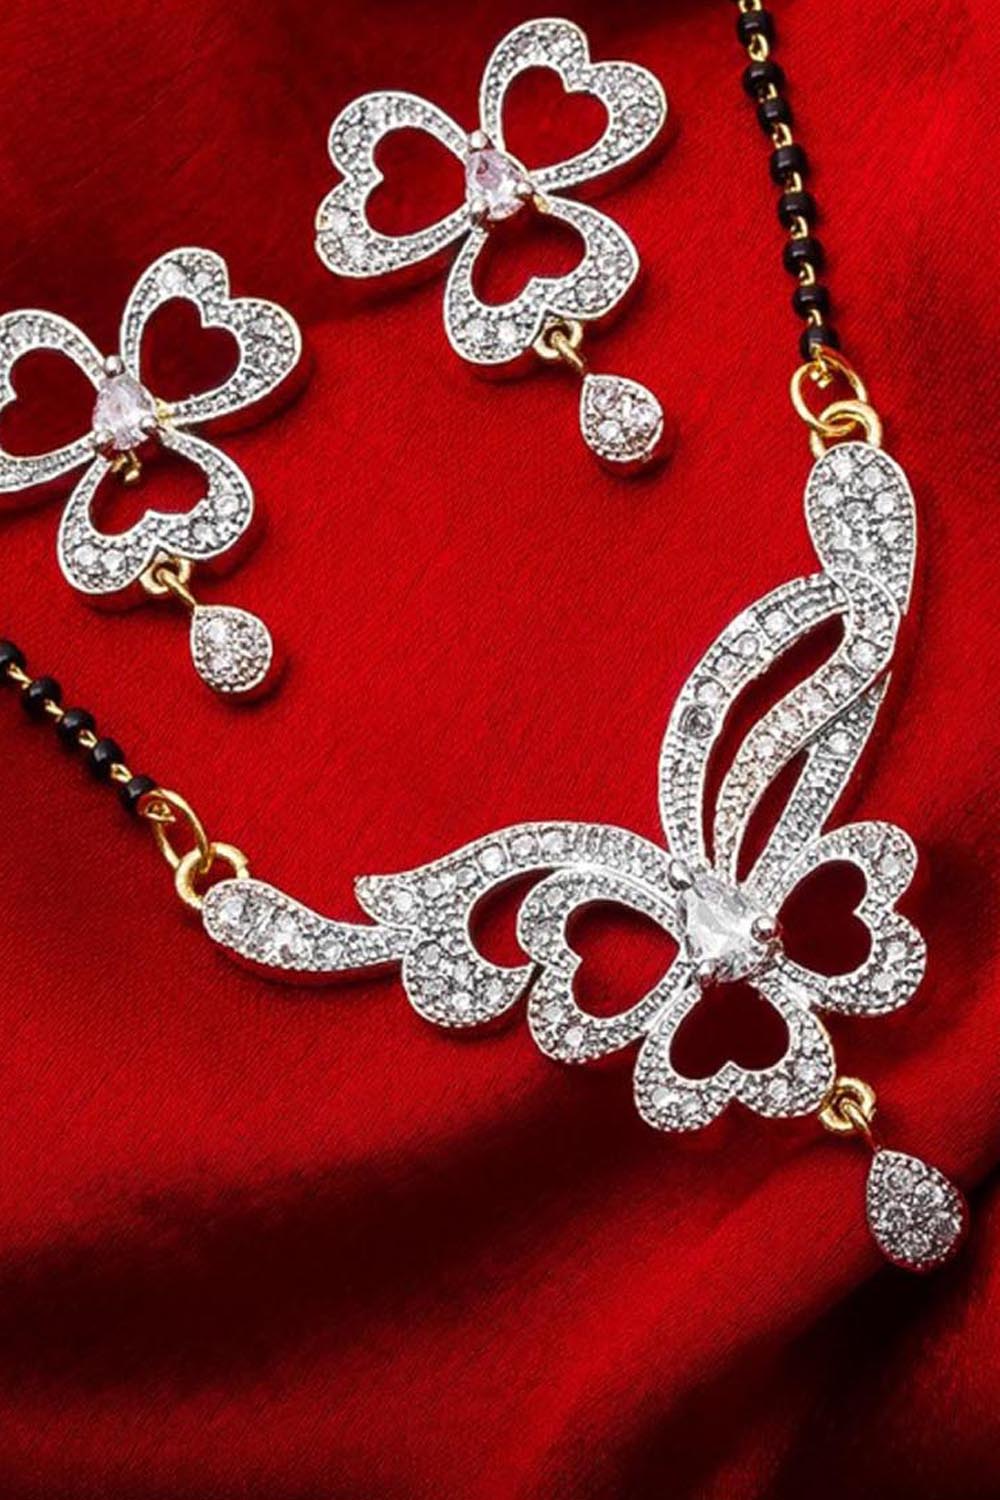  Shop Alloy Mangalsutra For Women's   Set in Silver and Gold At KarmaPlace